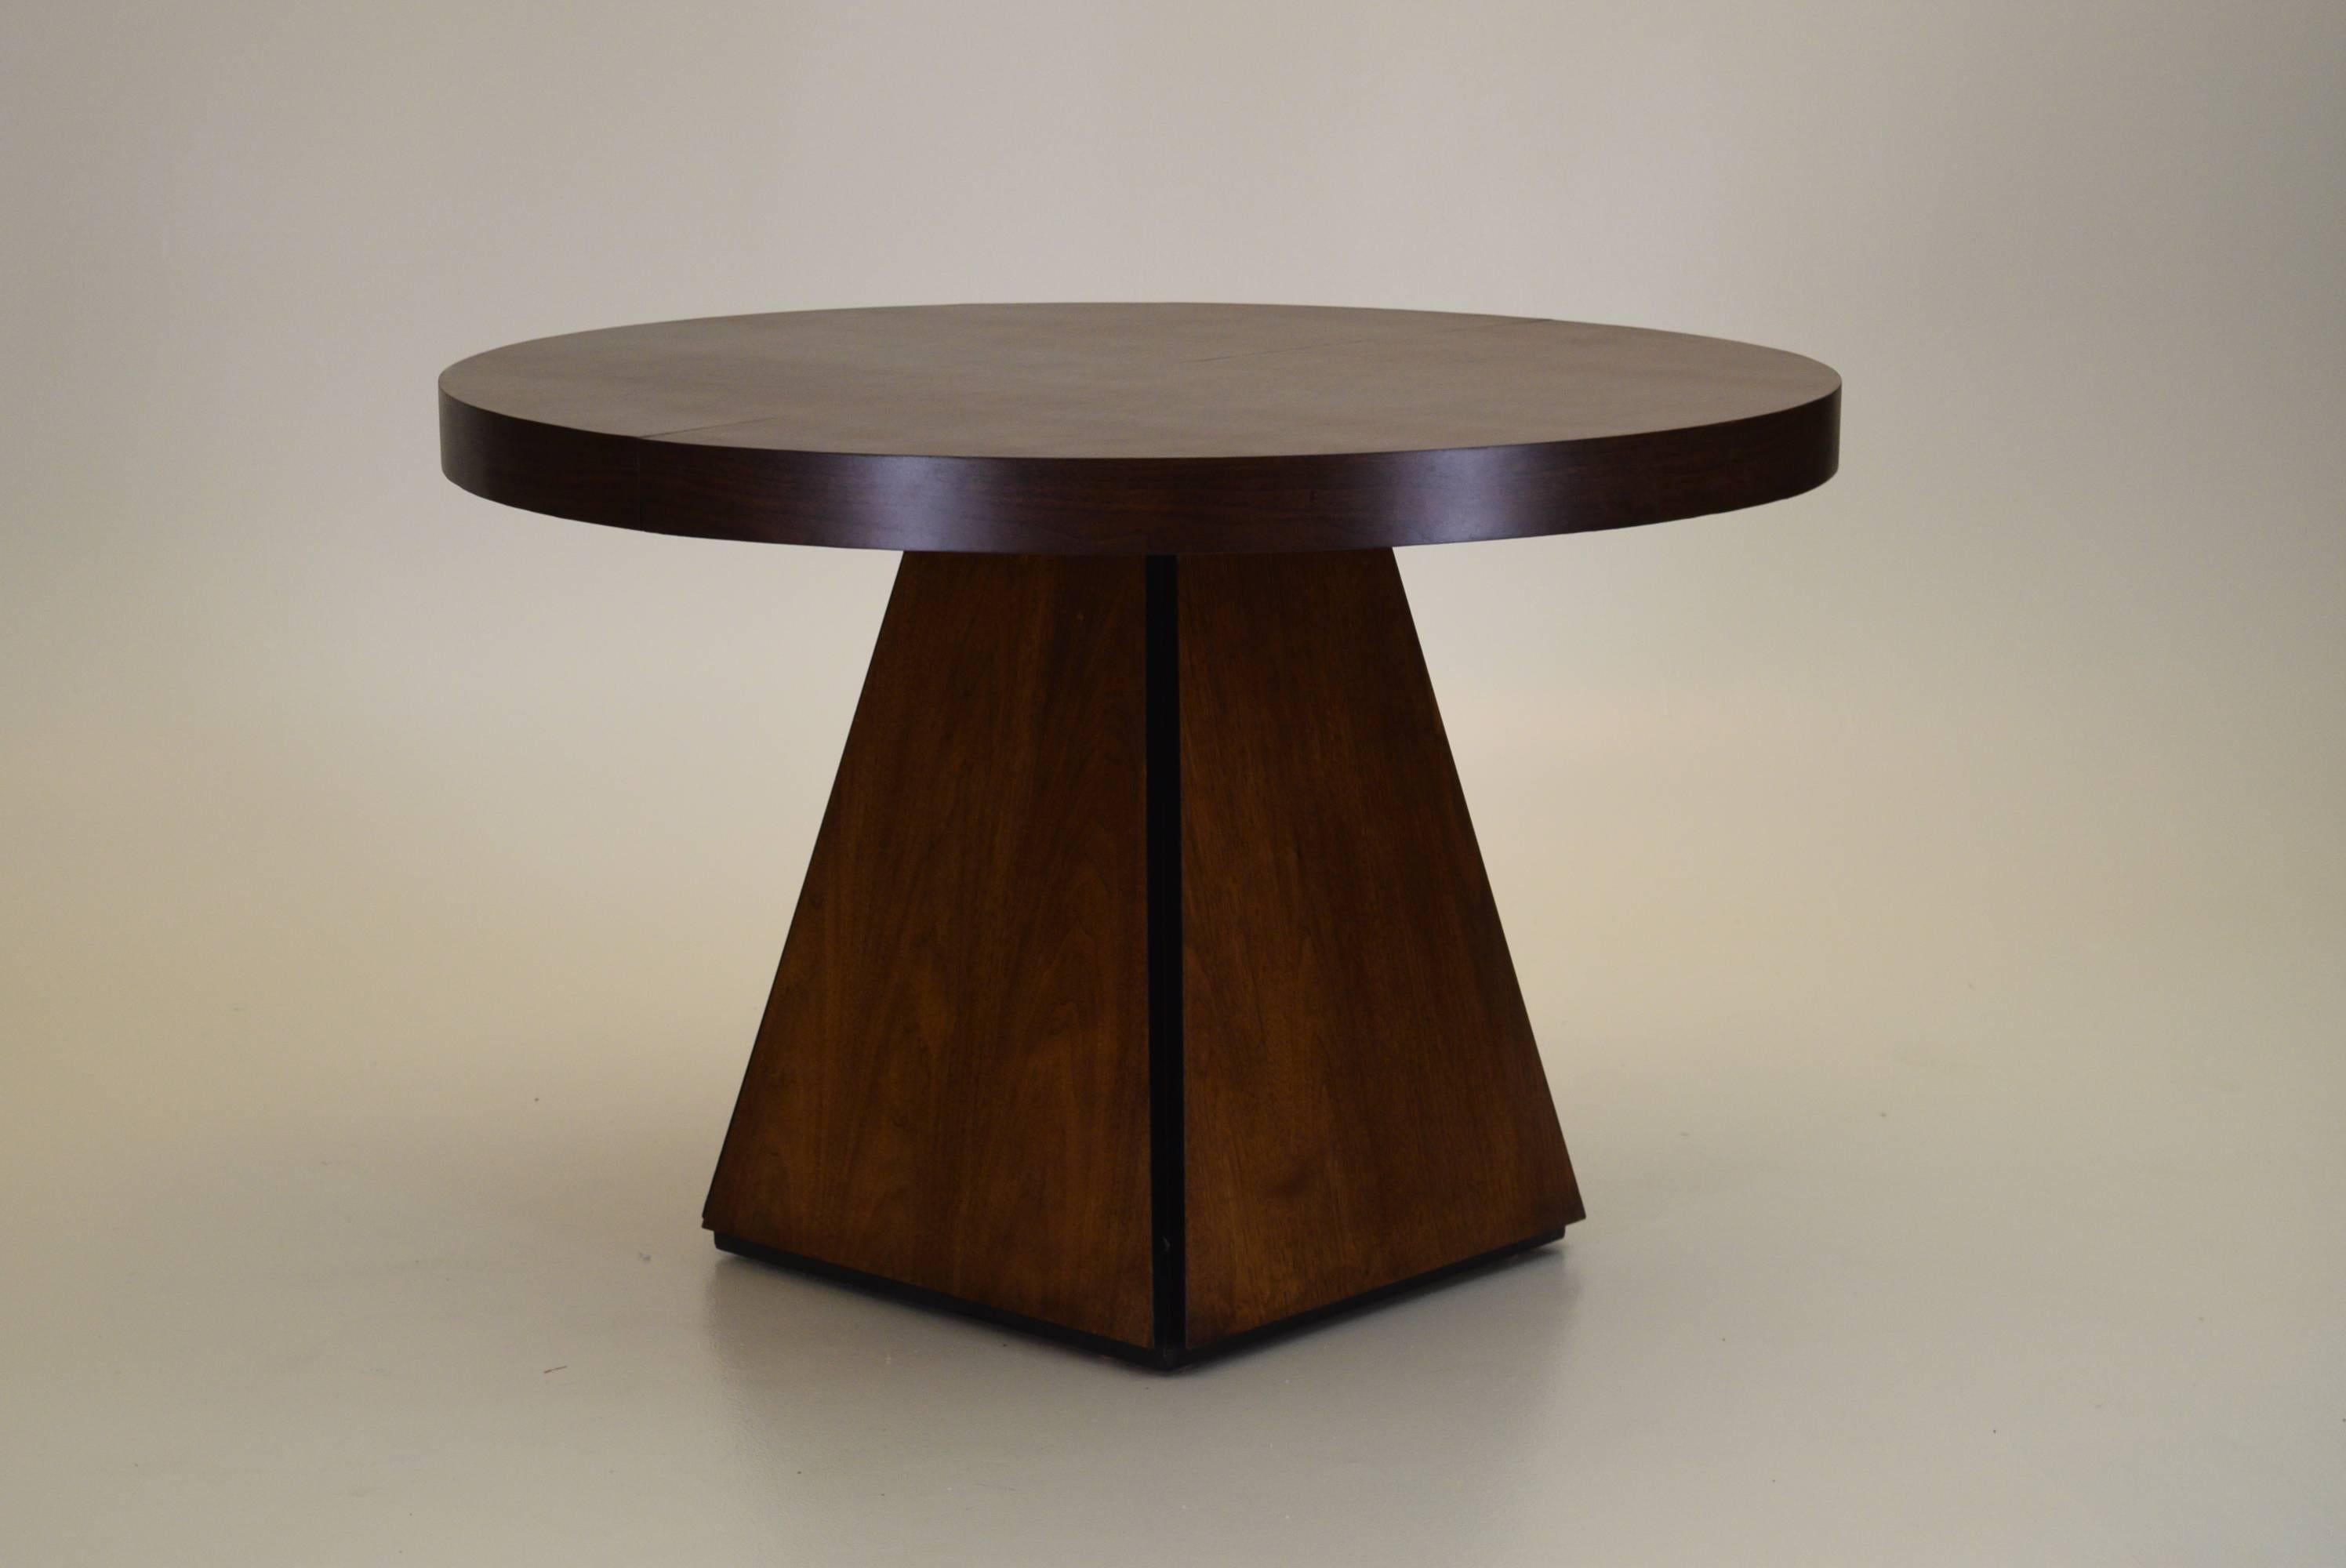 A very rare model dining table designed by Pierre Cardin as part of a line for Dillingham furniture.

In addition to this, the original single leaf is also present. 

The obelisk style base features recessed corners and a lip that allows the